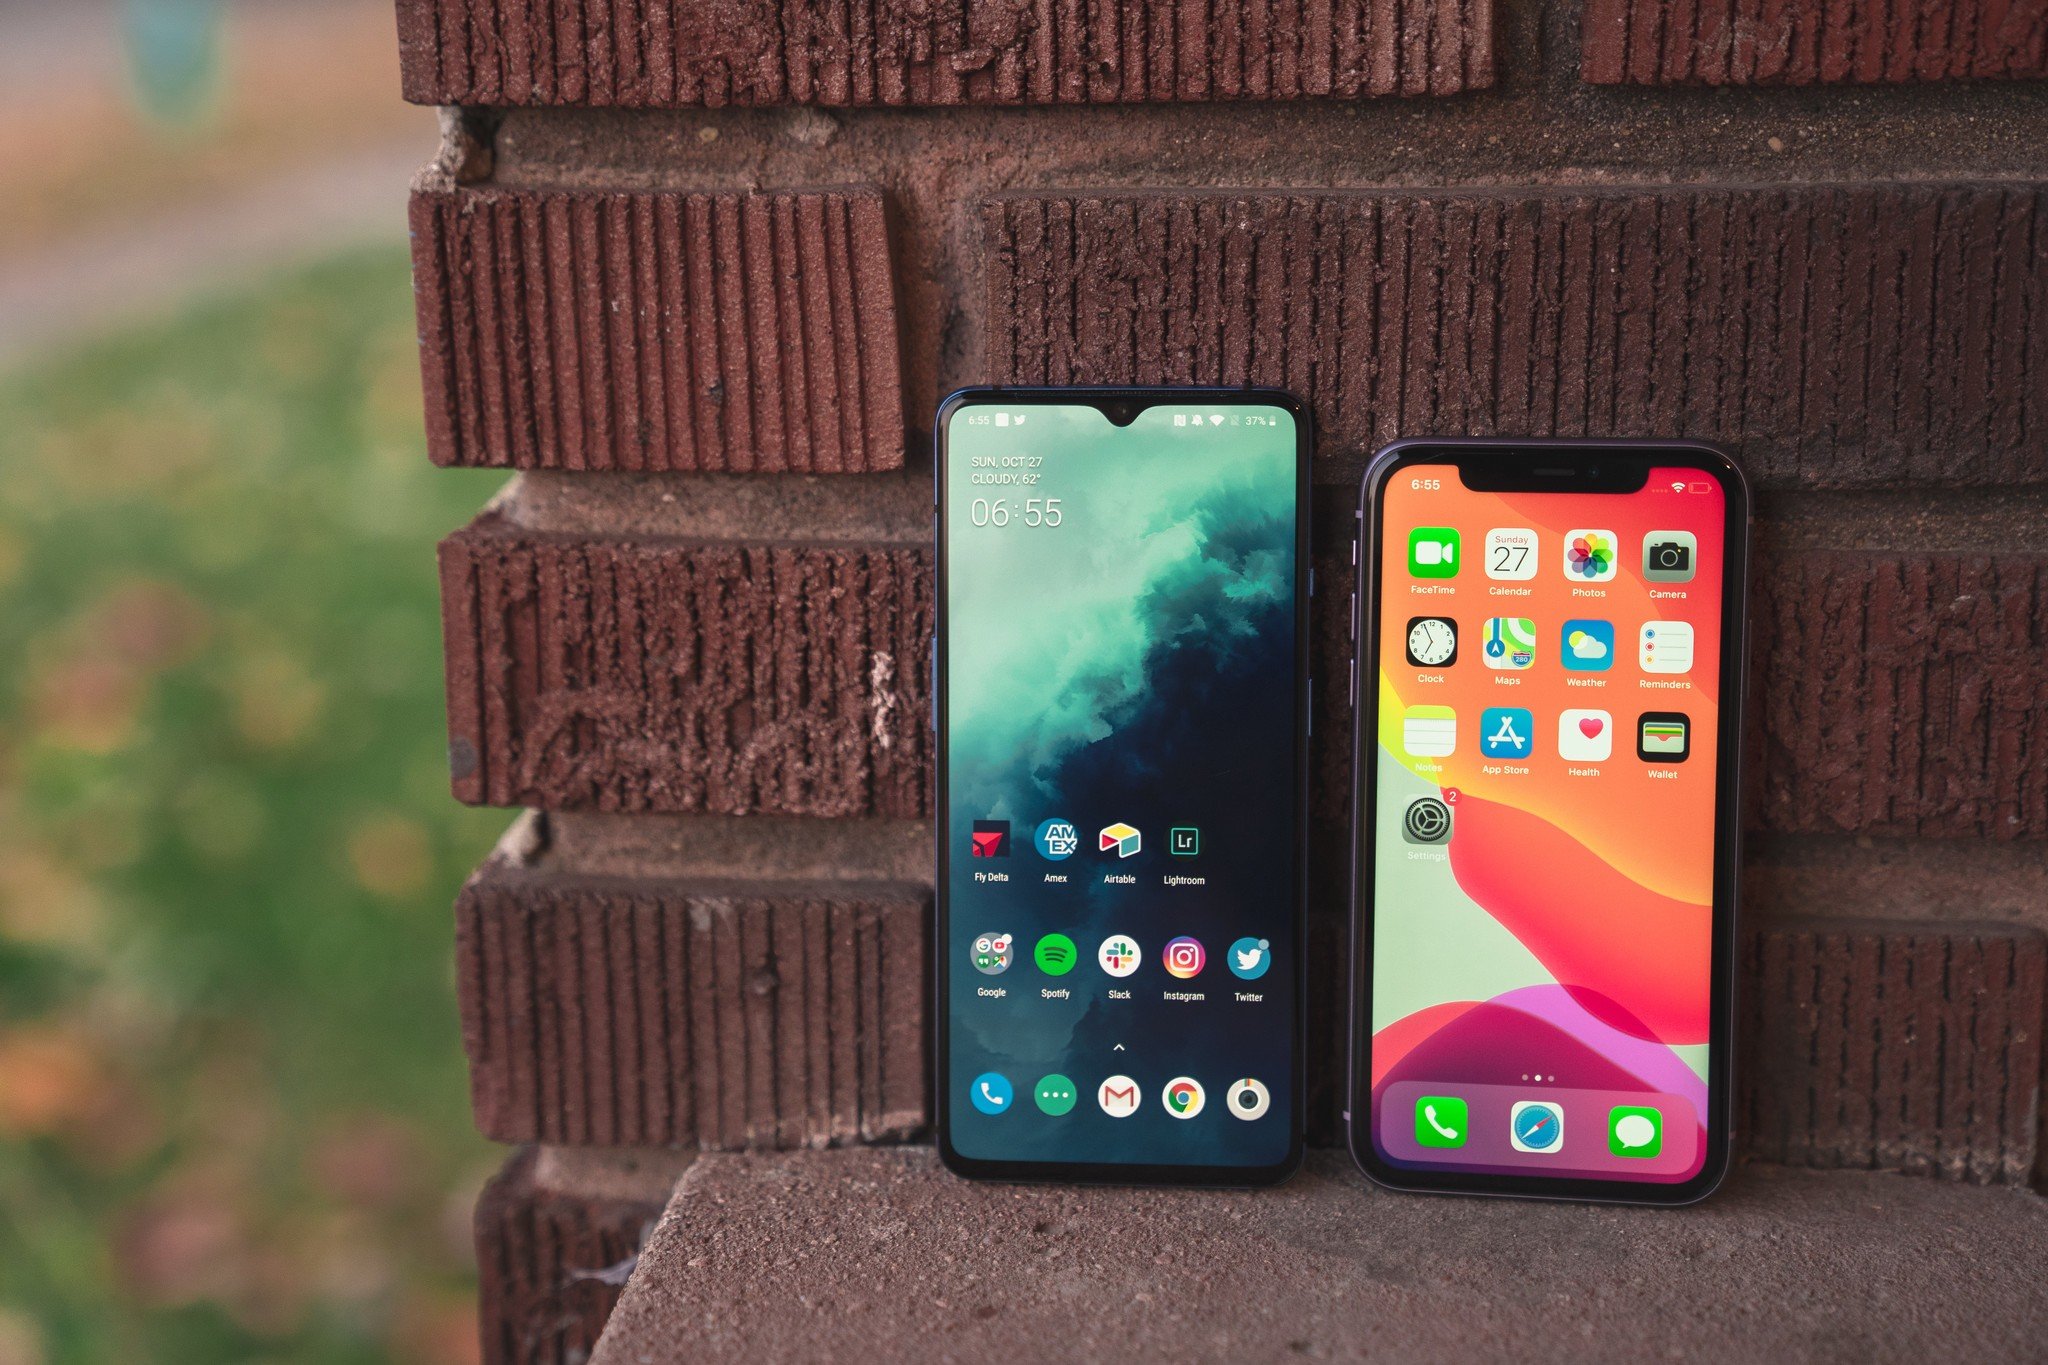 OnePlus 7T and iPhone 11 displays